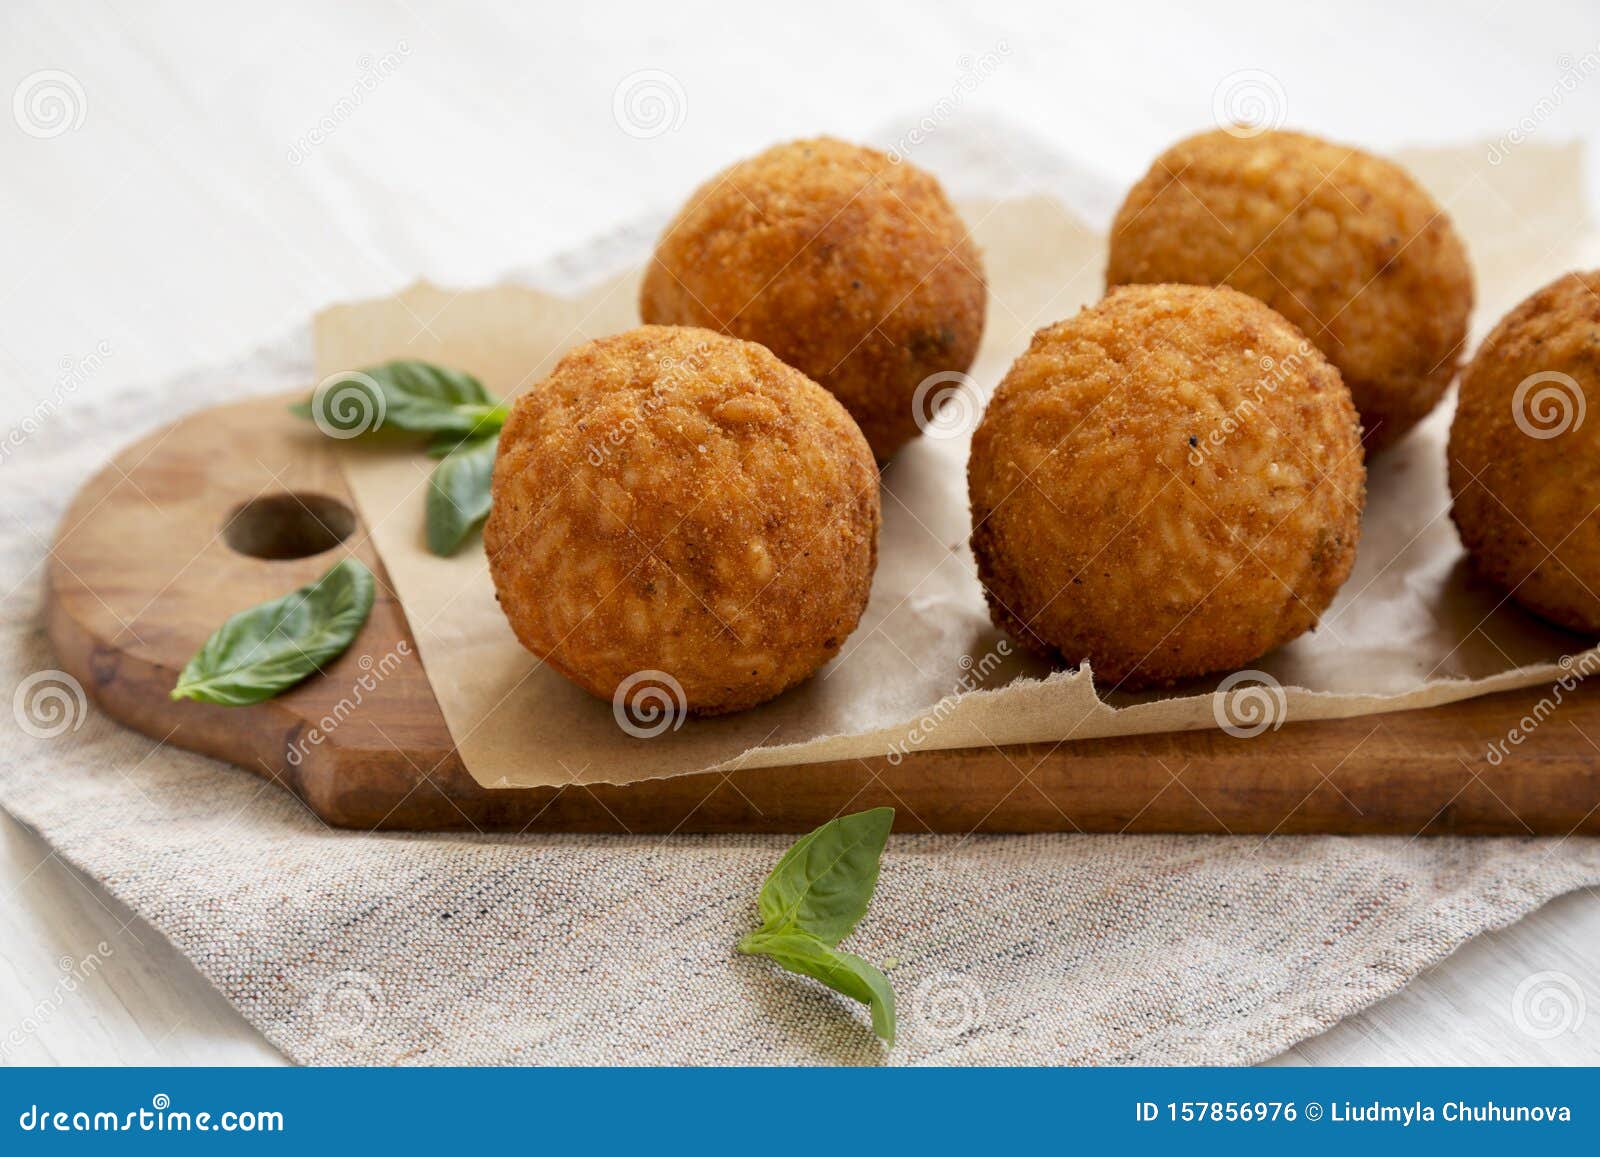 Homemade Fried Arancini With Basil On A White Wooden Background Side